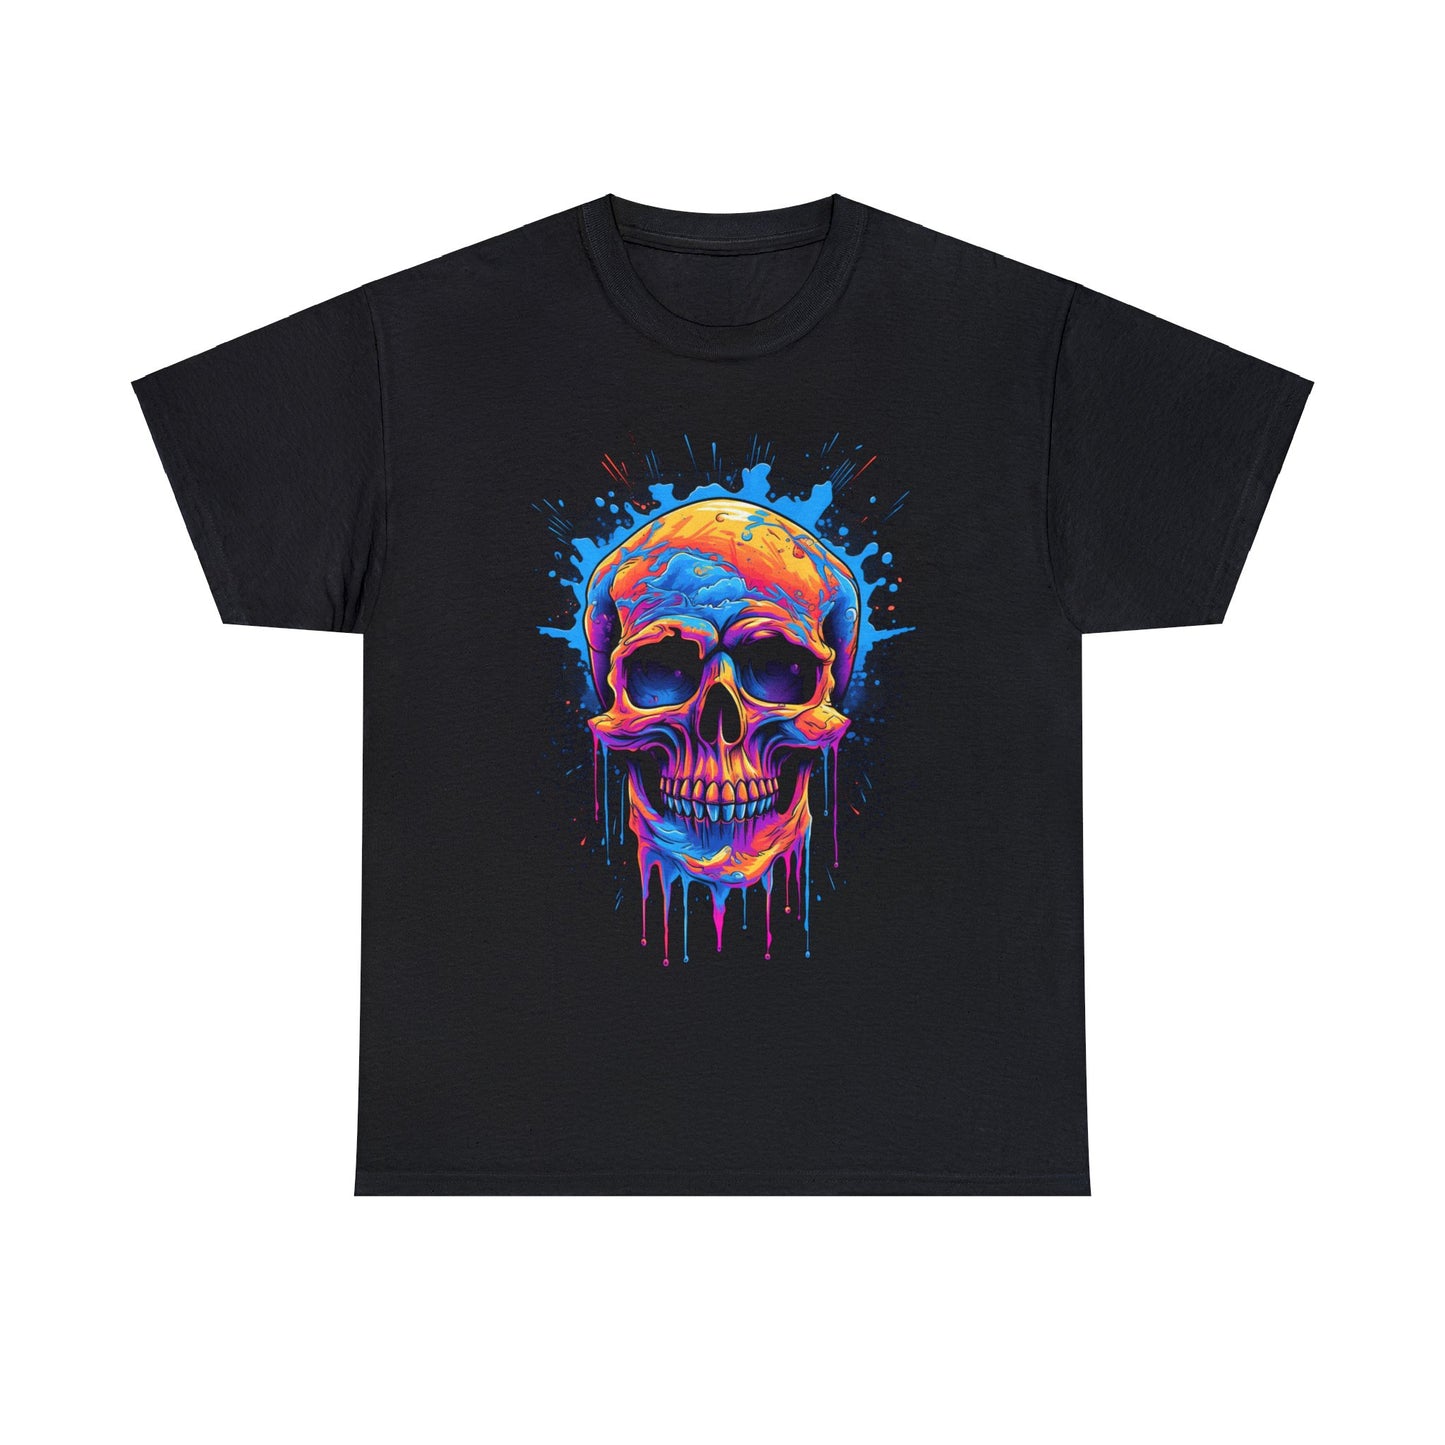 Trippy Contrast Skull Painted Graphic Design Tee